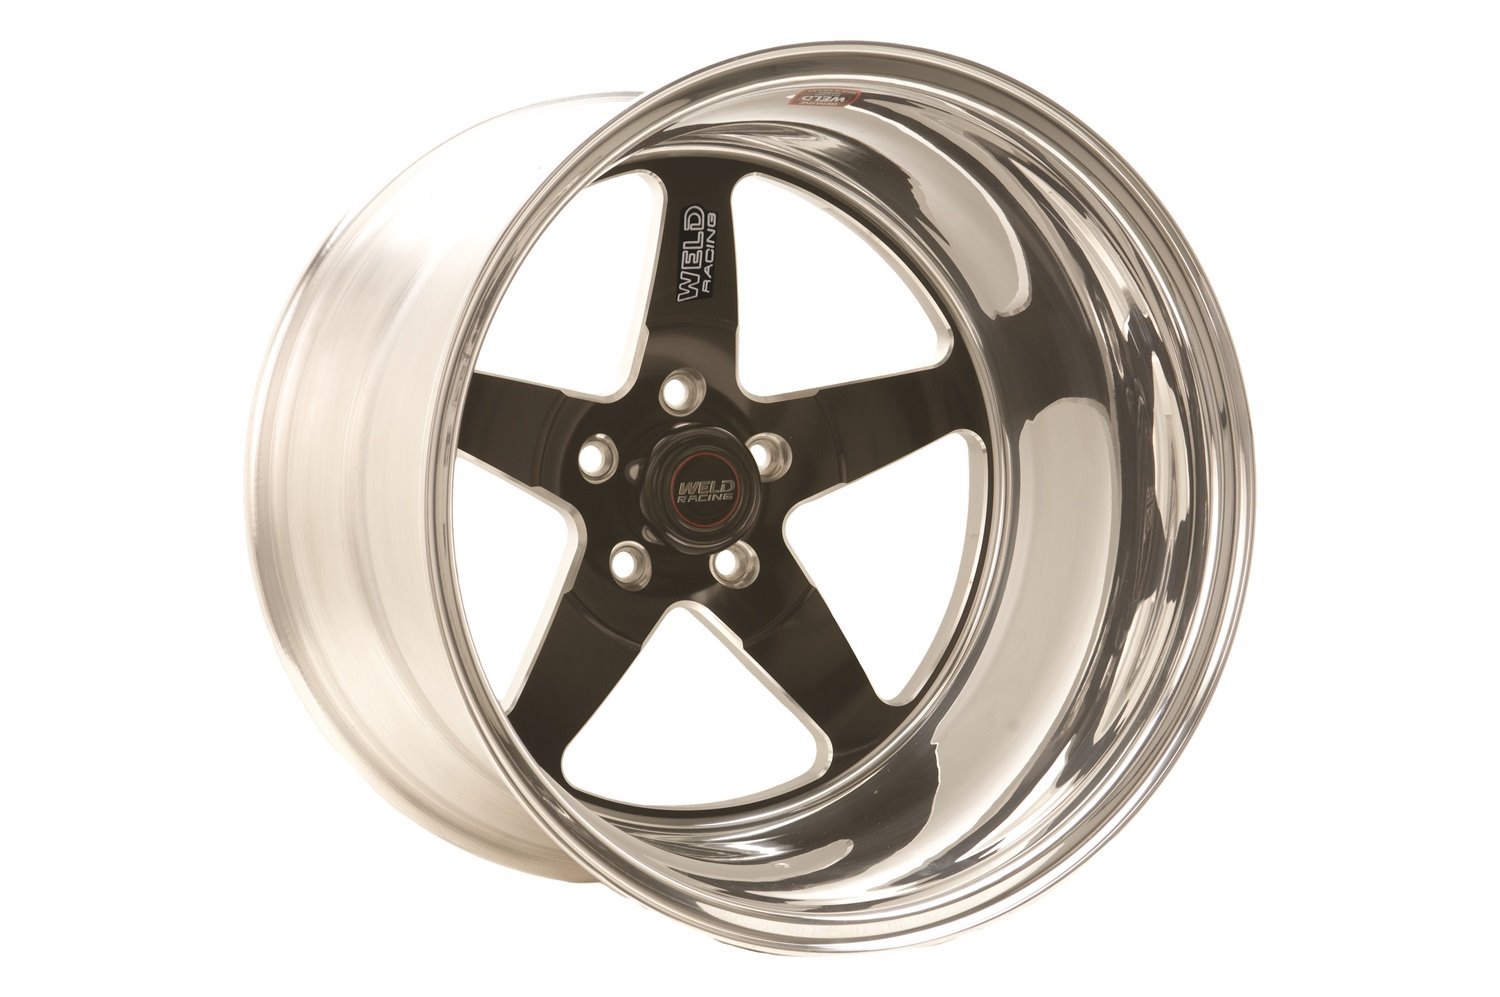 RT-S Series S71 Wheel Size: 15" x 6" Bolt Circle: 5 x 4-3/4" Back Space: 3-1/2"